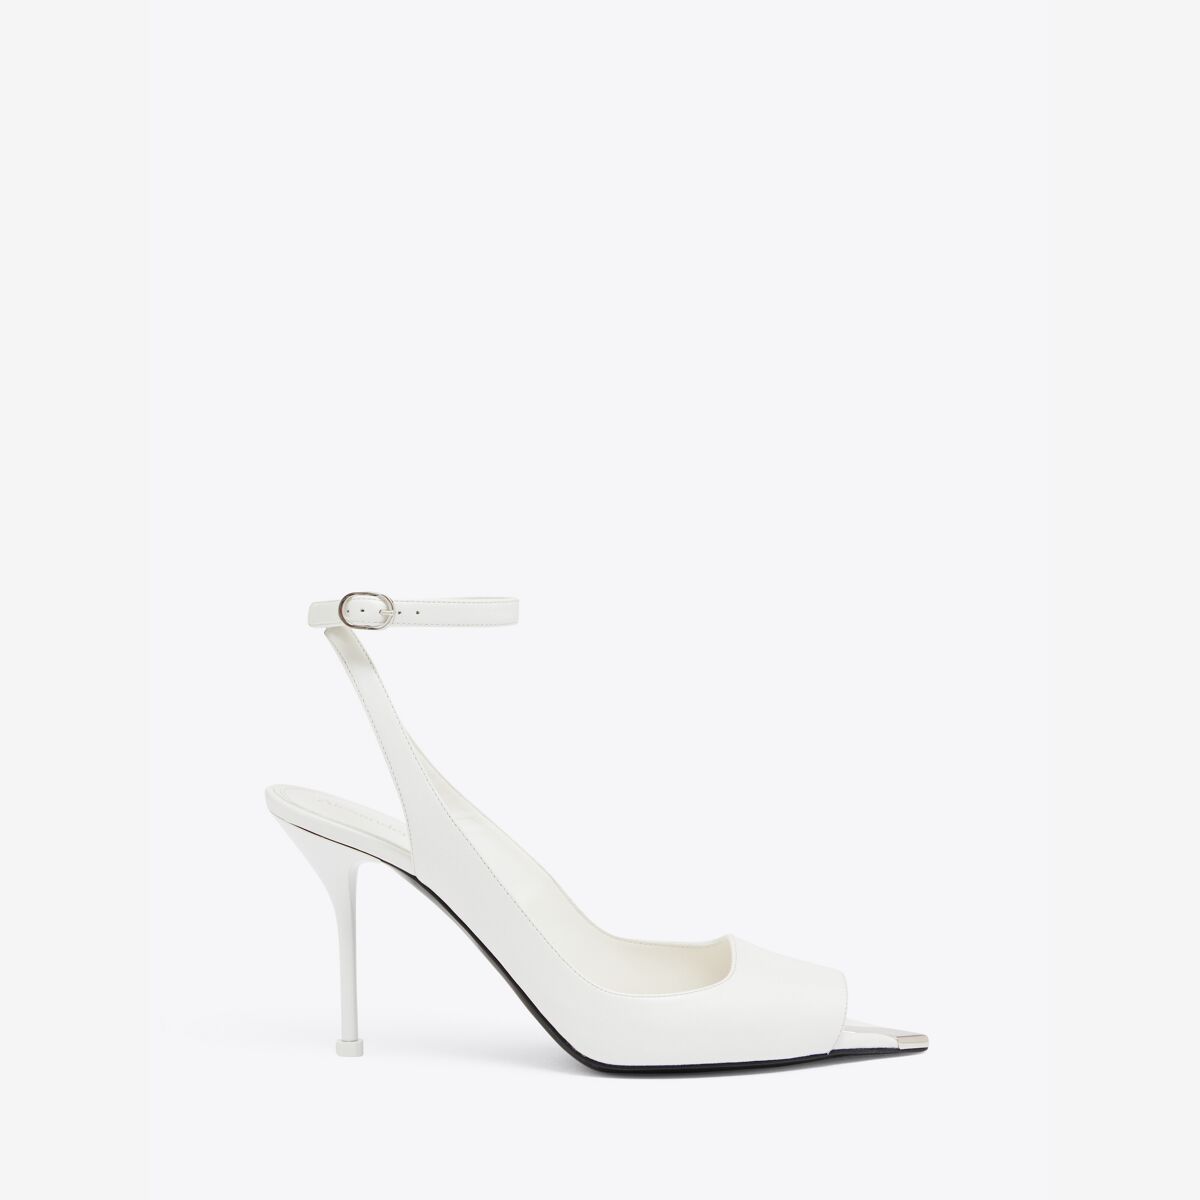 Alexander Mcqueen Punk Ankle Strap Sandal In Ivory/silver